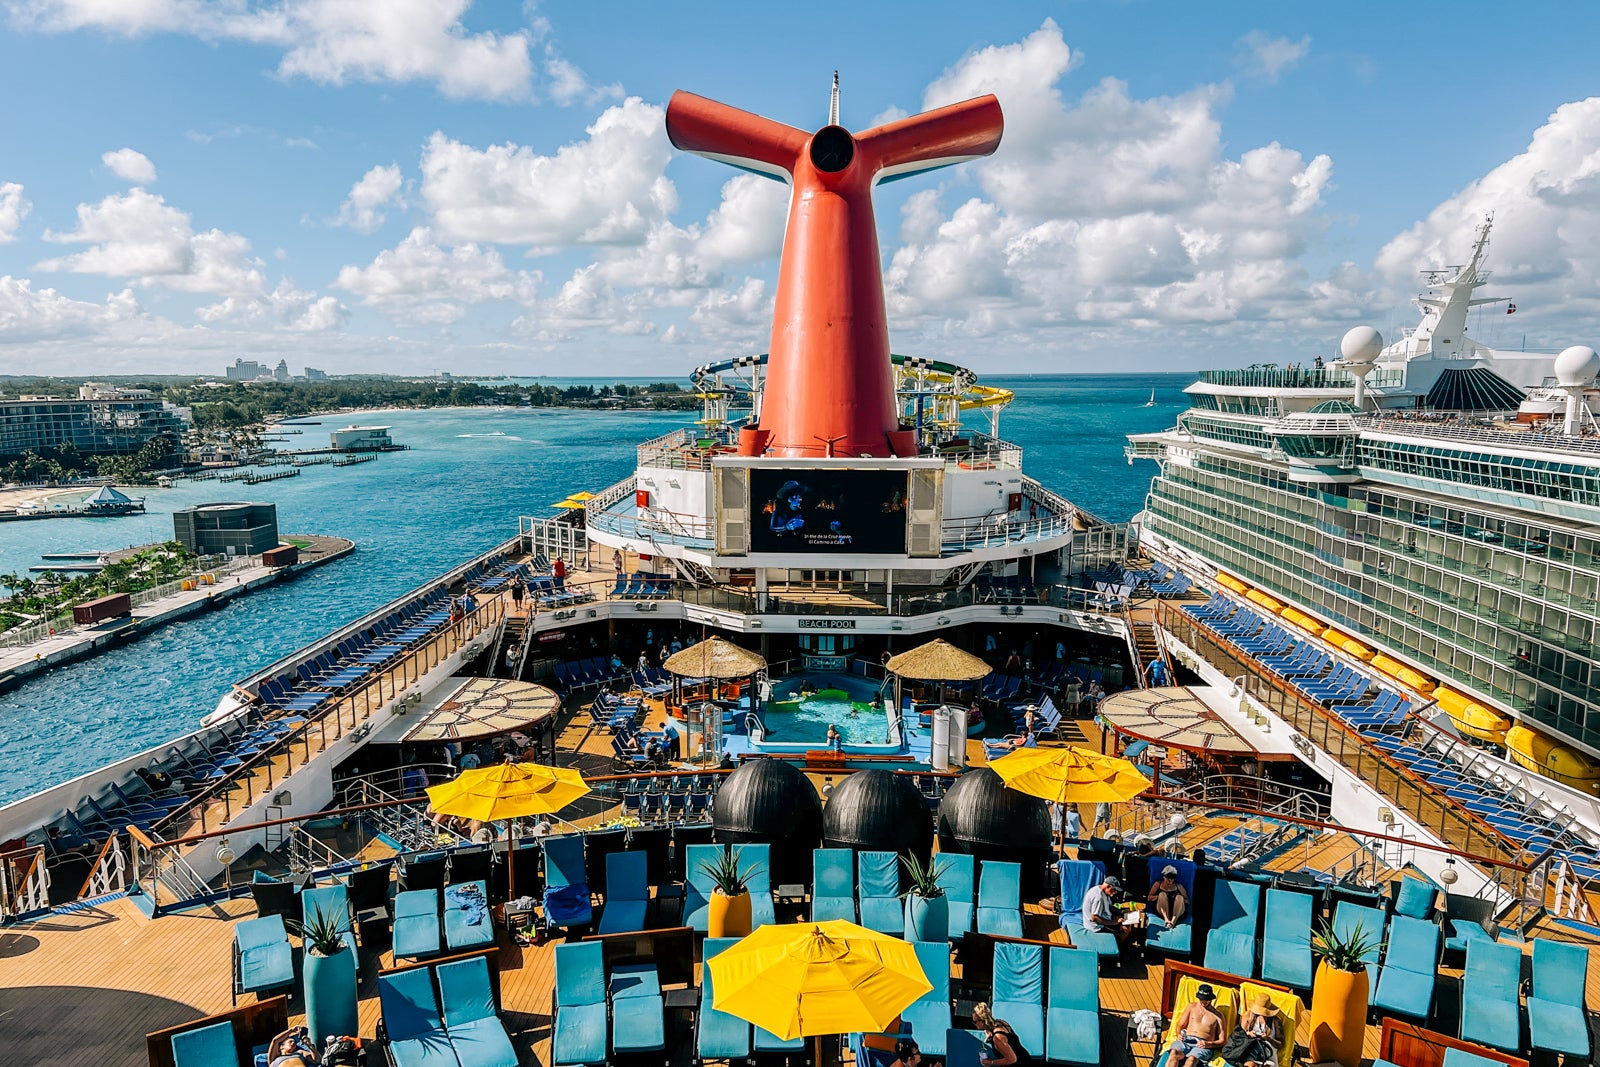 You are currently viewing Carnival Sunshine cruise ship review: What it’s like to cruise on Carnival’s oldest ship